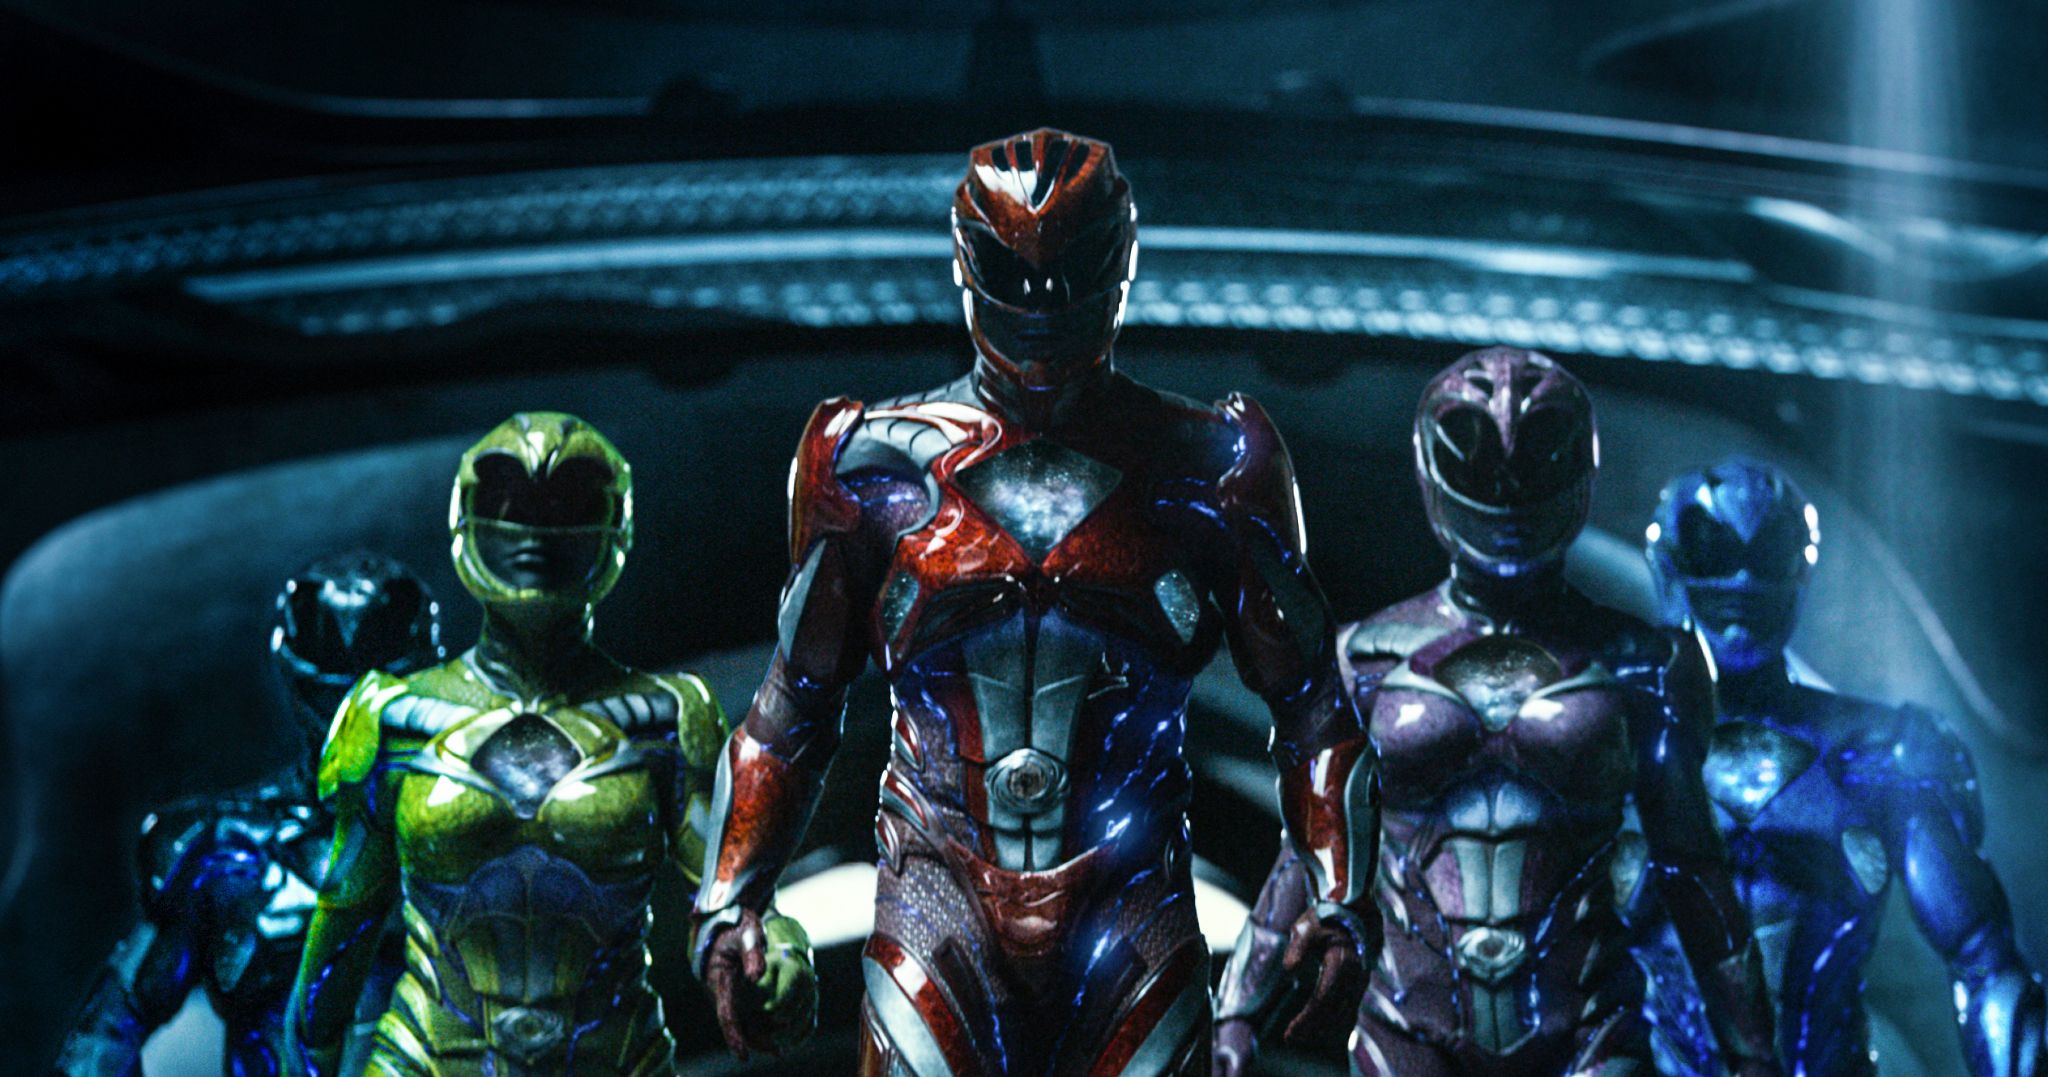 Power Rangers film would've been better as a CW series